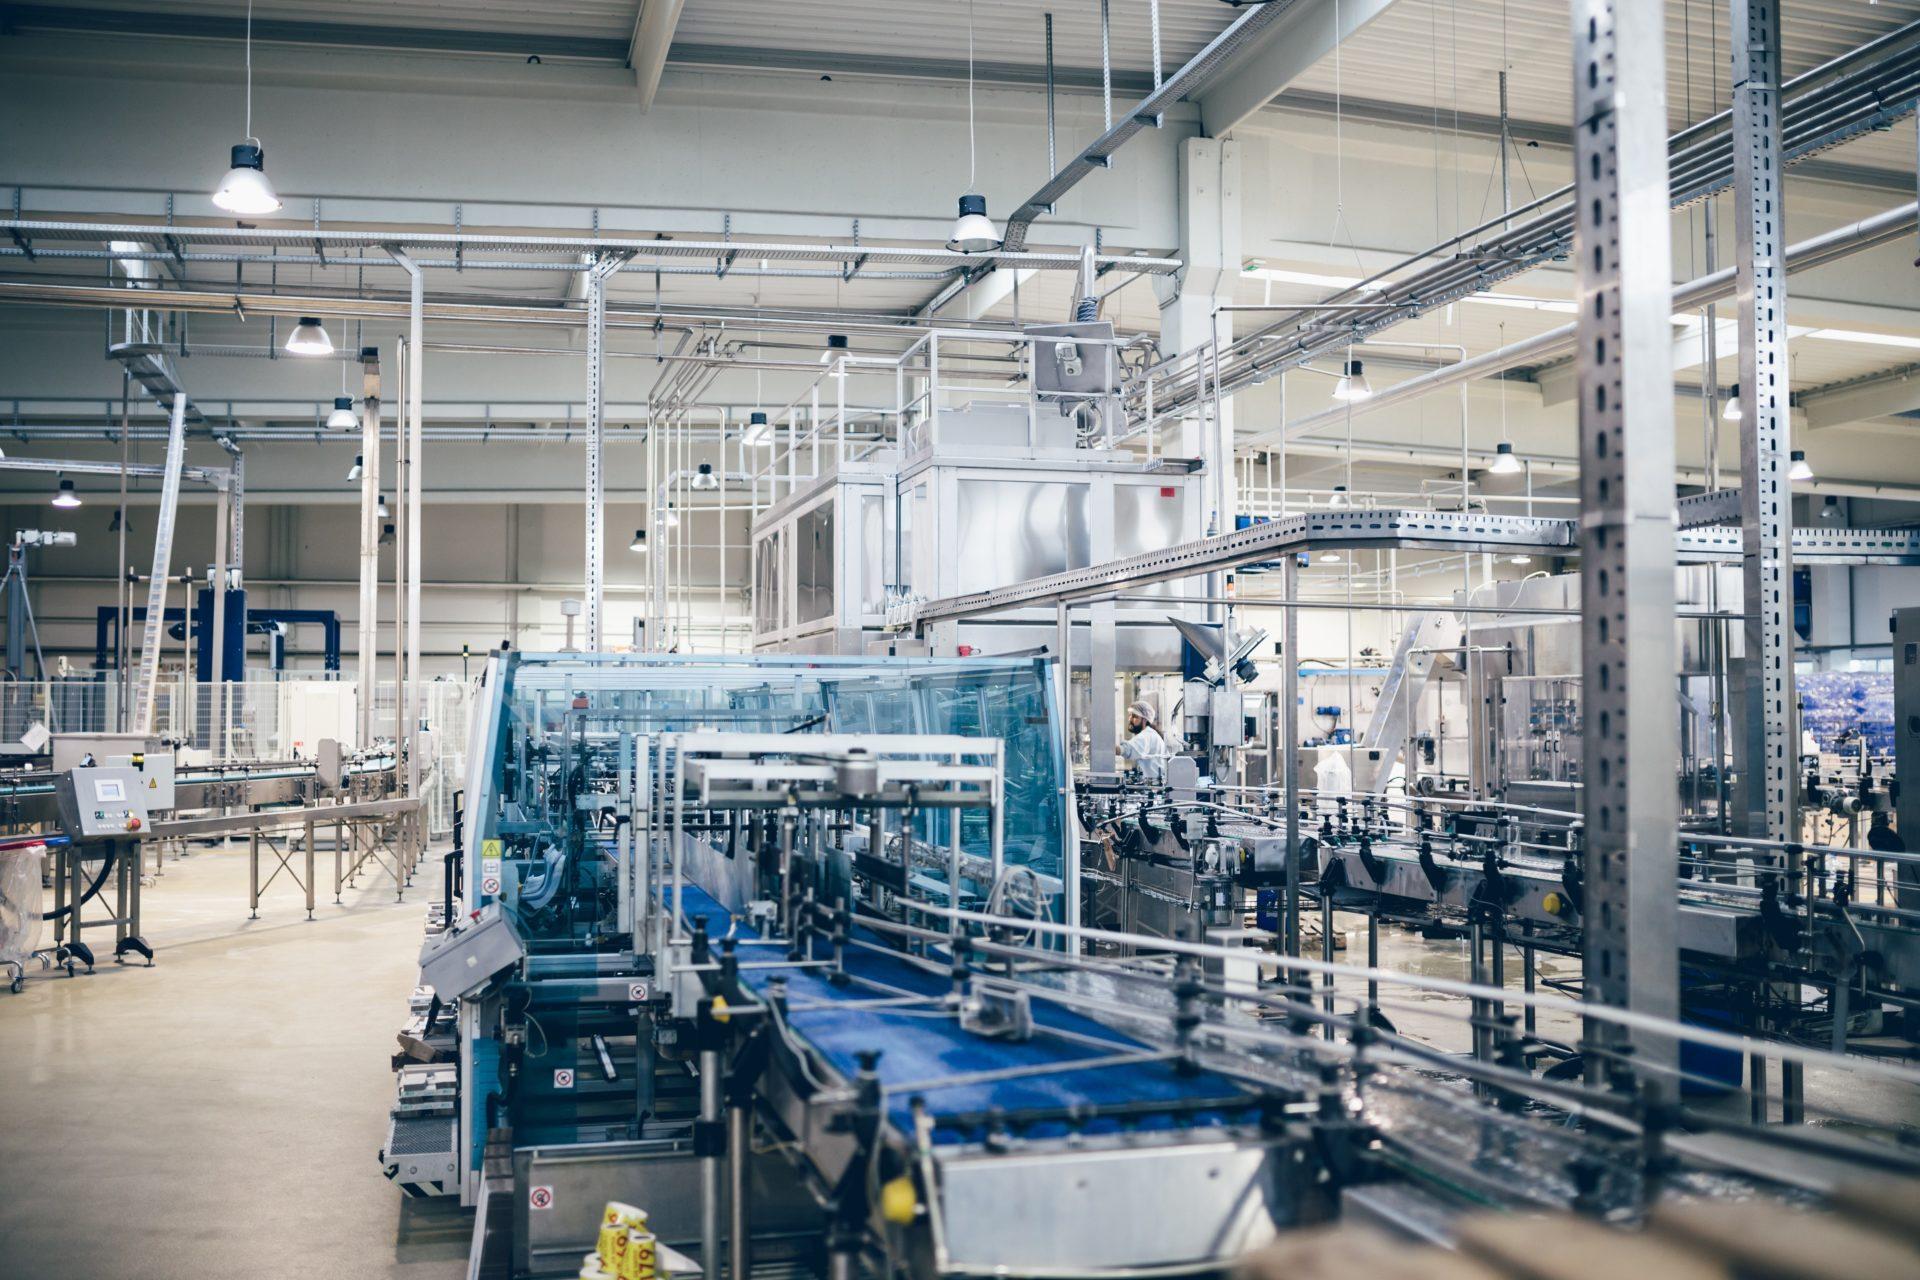 Industrial interiors. Robotic factory line for processing and quality control of pure spring water bottled into canisters. Low light and small amount of noise visible.